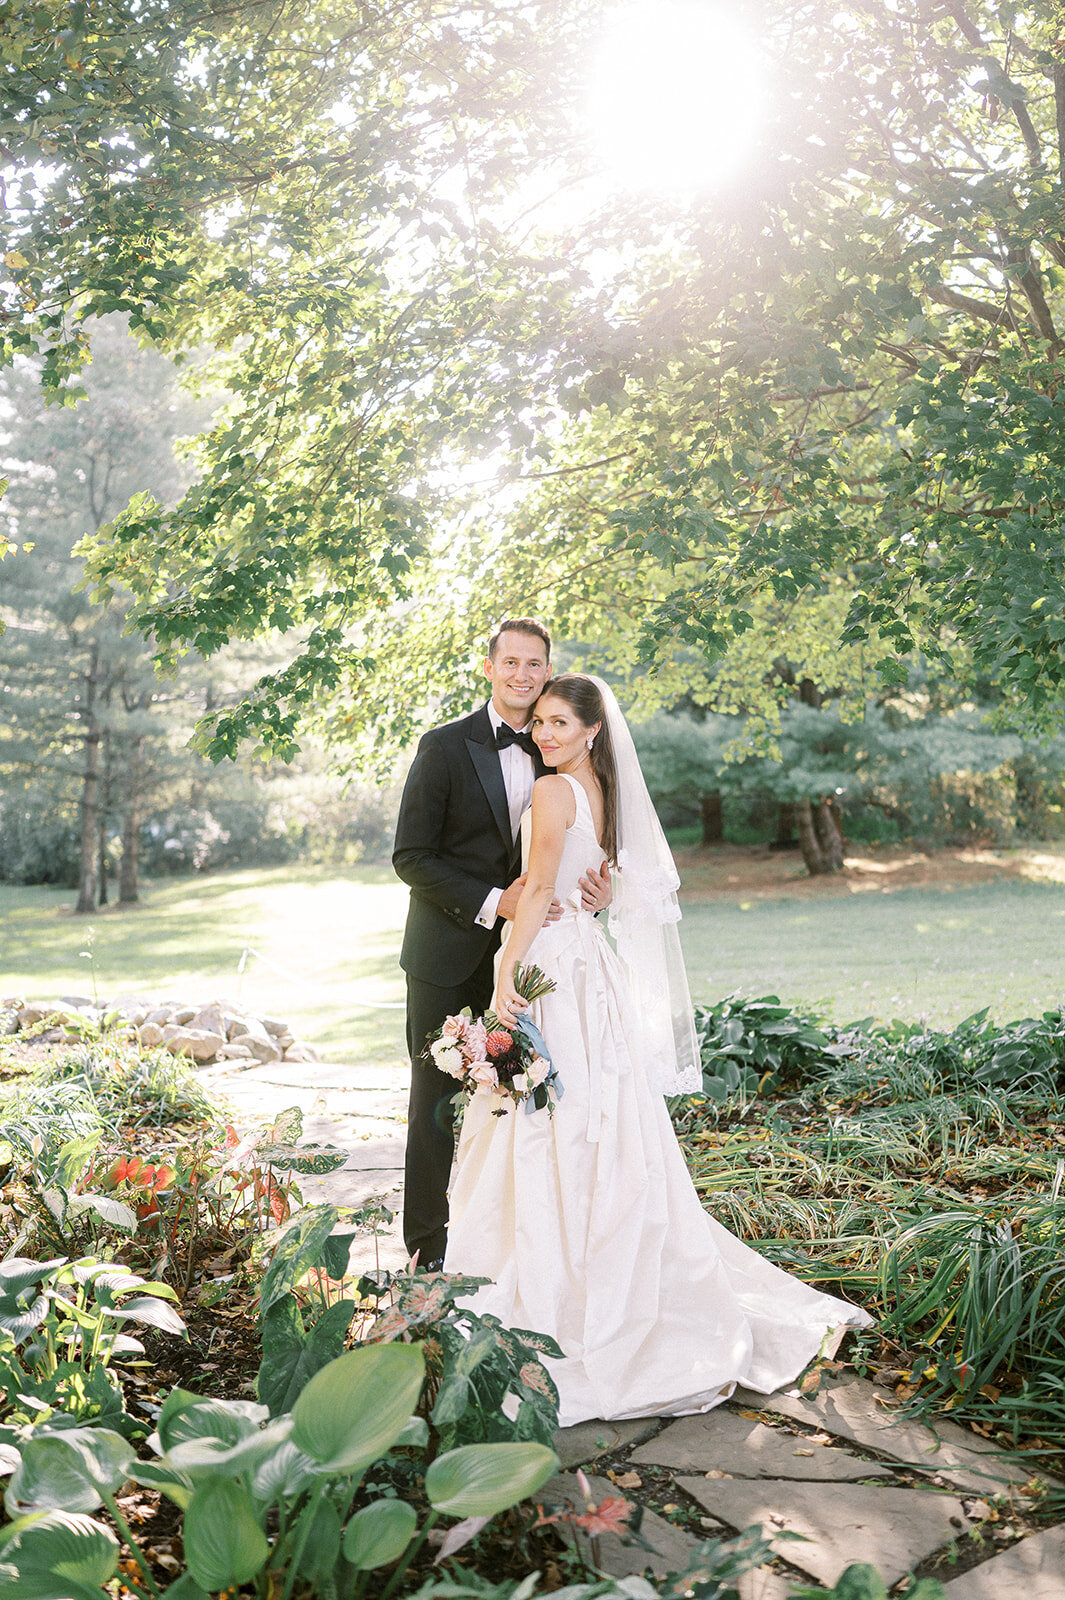 Barbieri Wedding Preview by Michelle Lange Photography-154